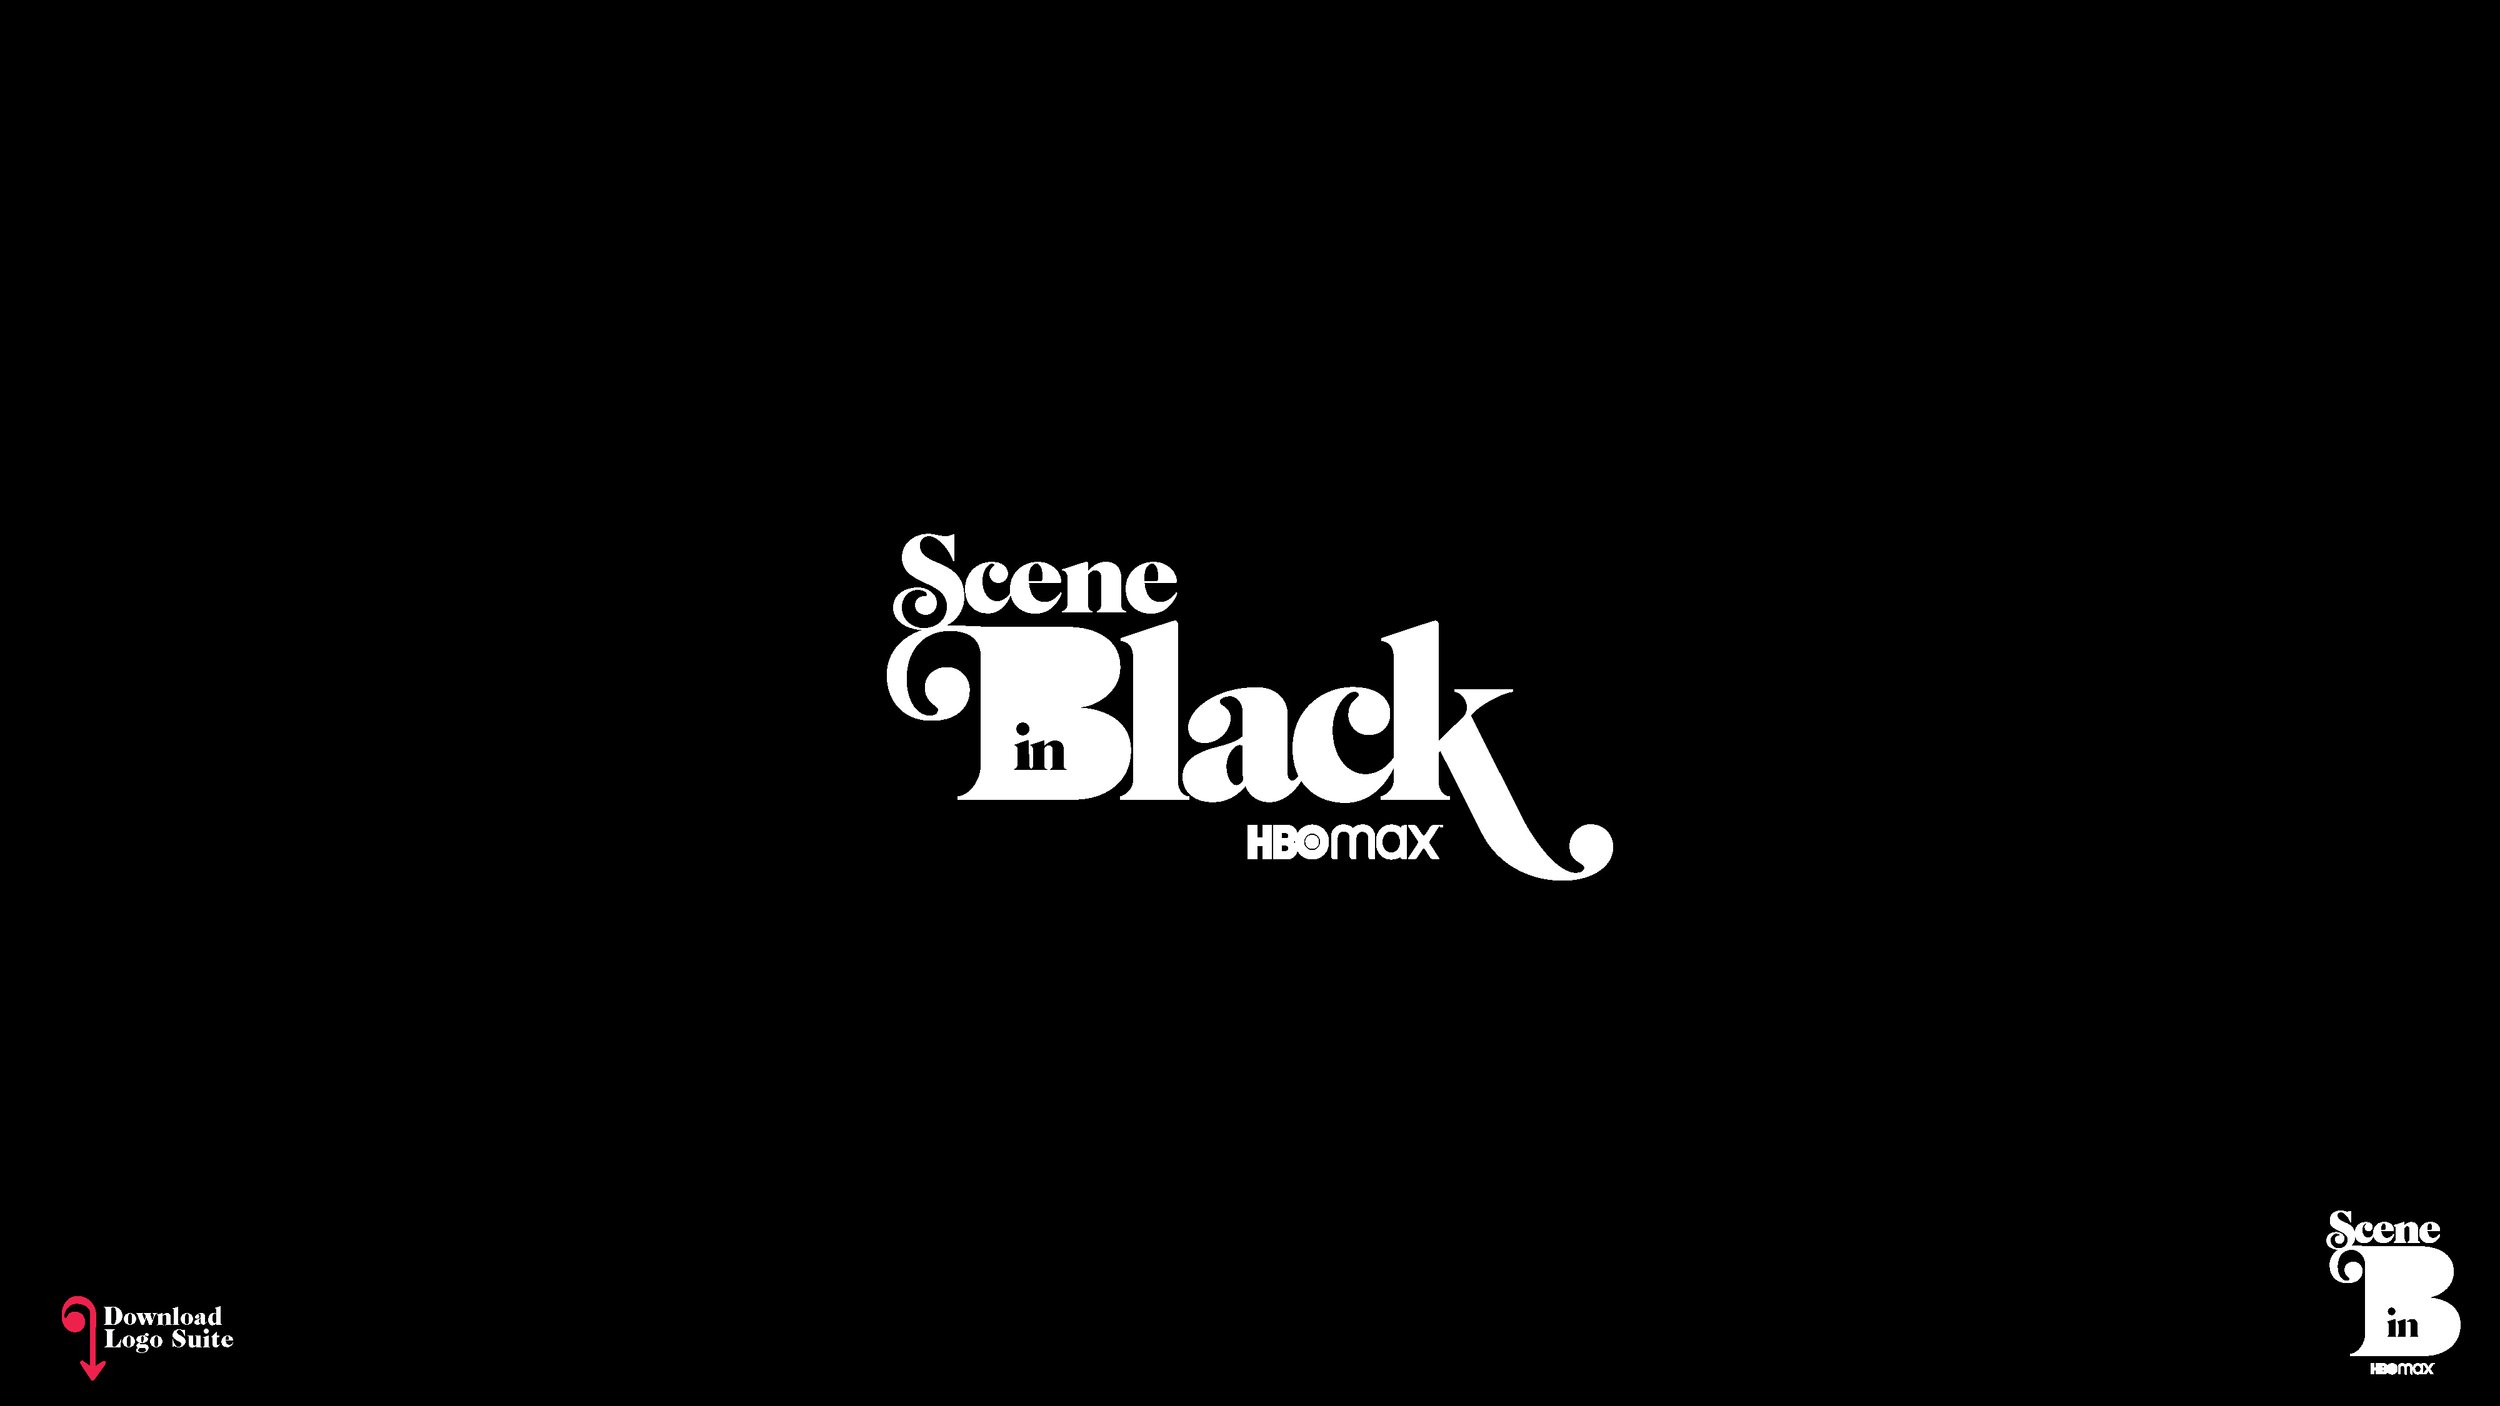 HBOMax_SceneinBlack | Brand Guidelines | Final Oct21_Page_11.jpg